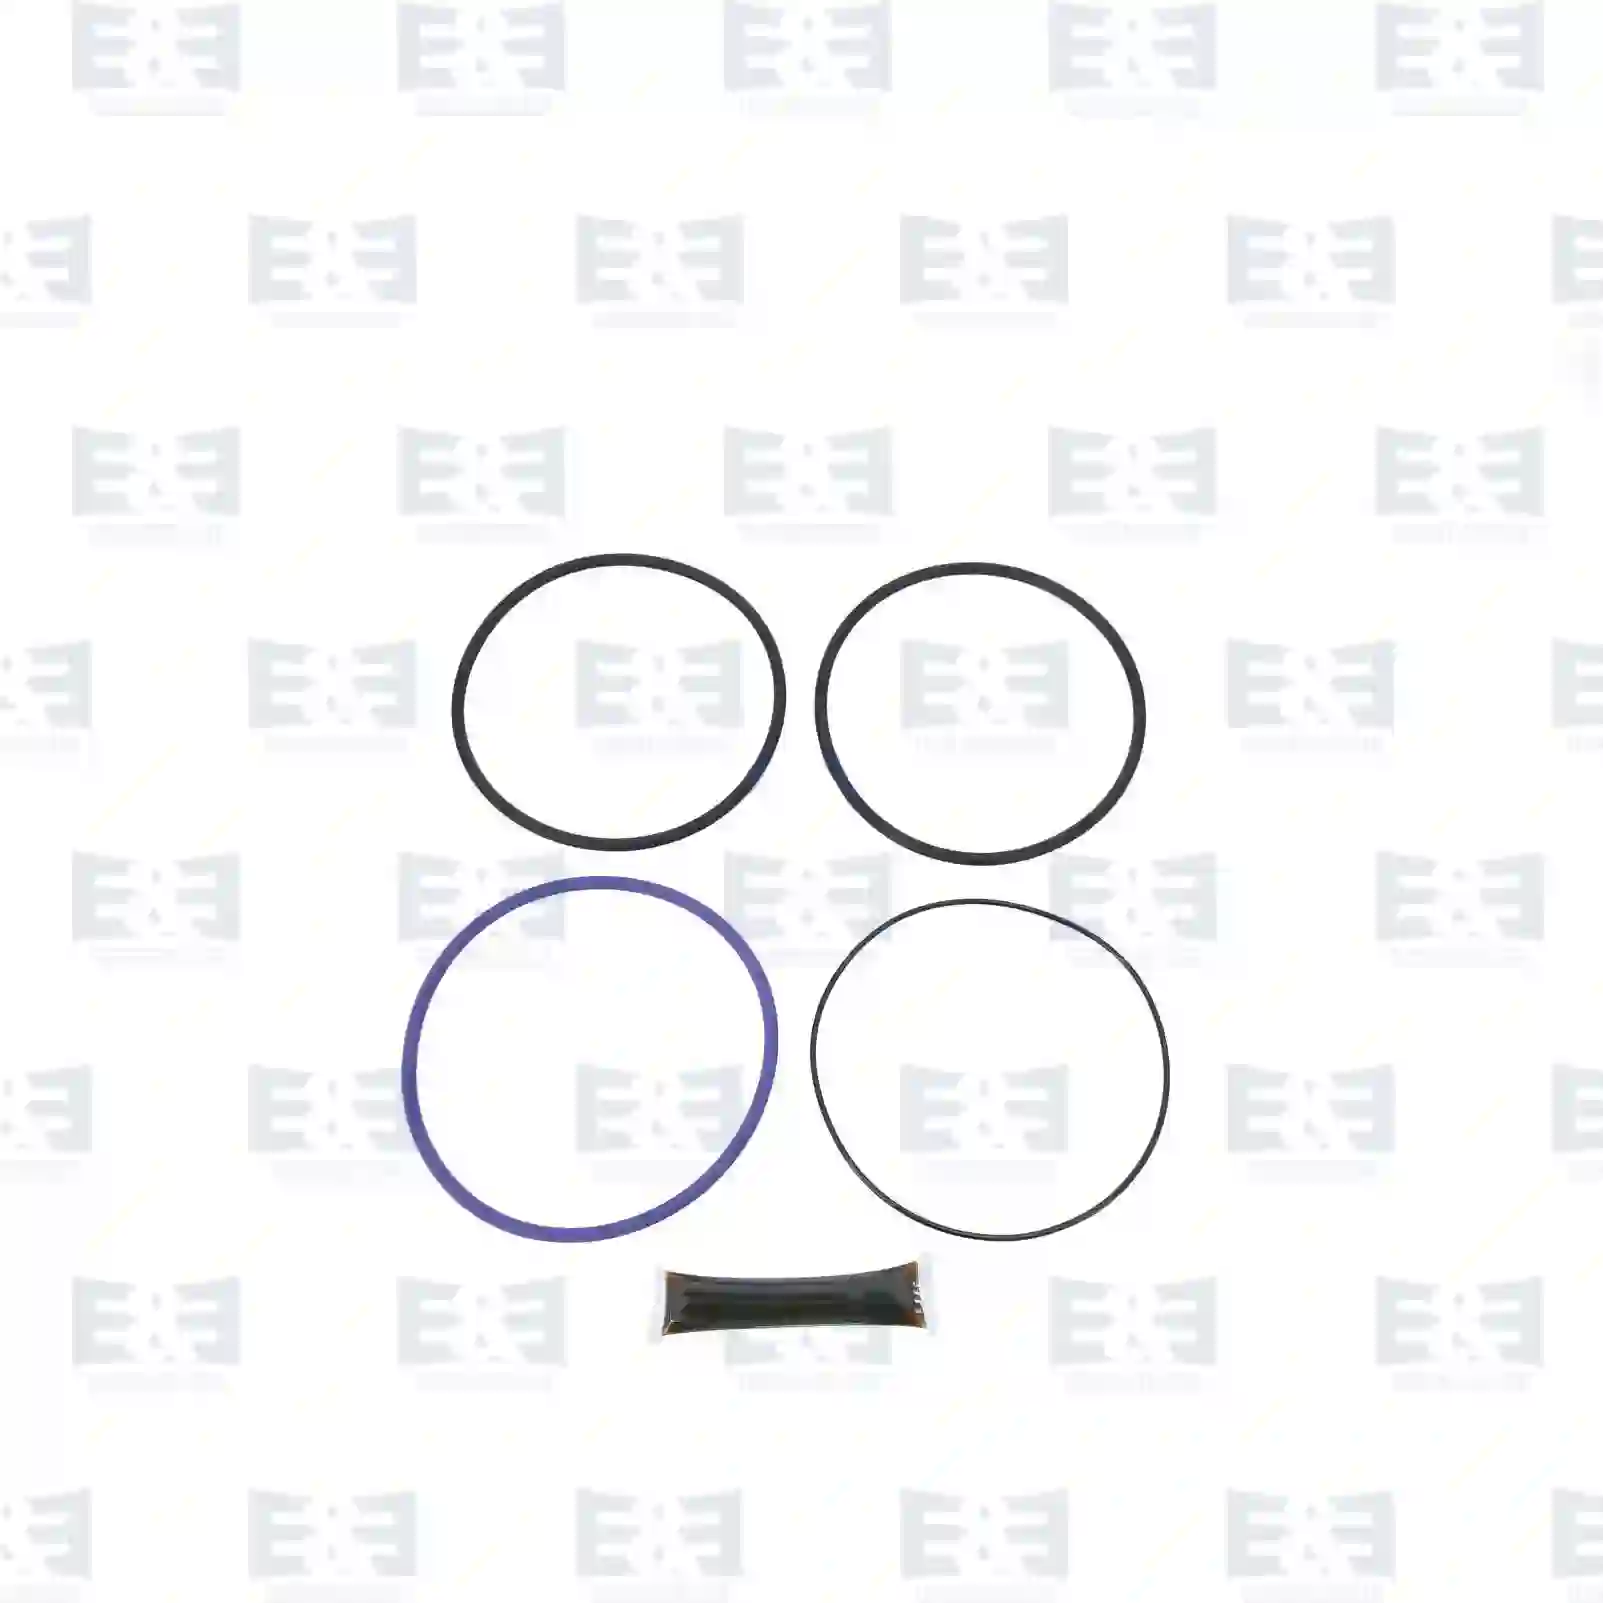 Seal ring kit, cylinder liner, 2E2207489, 7400270950, 270950, 271121, ZG02072-0008 ||  2E2207489 E&E Truck Spare Parts | Truck Spare Parts, Auotomotive Spare Parts Seal ring kit, cylinder liner, 2E2207489, 7400270950, 270950, 271121, ZG02072-0008 ||  2E2207489 E&E Truck Spare Parts | Truck Spare Parts, Auotomotive Spare Parts